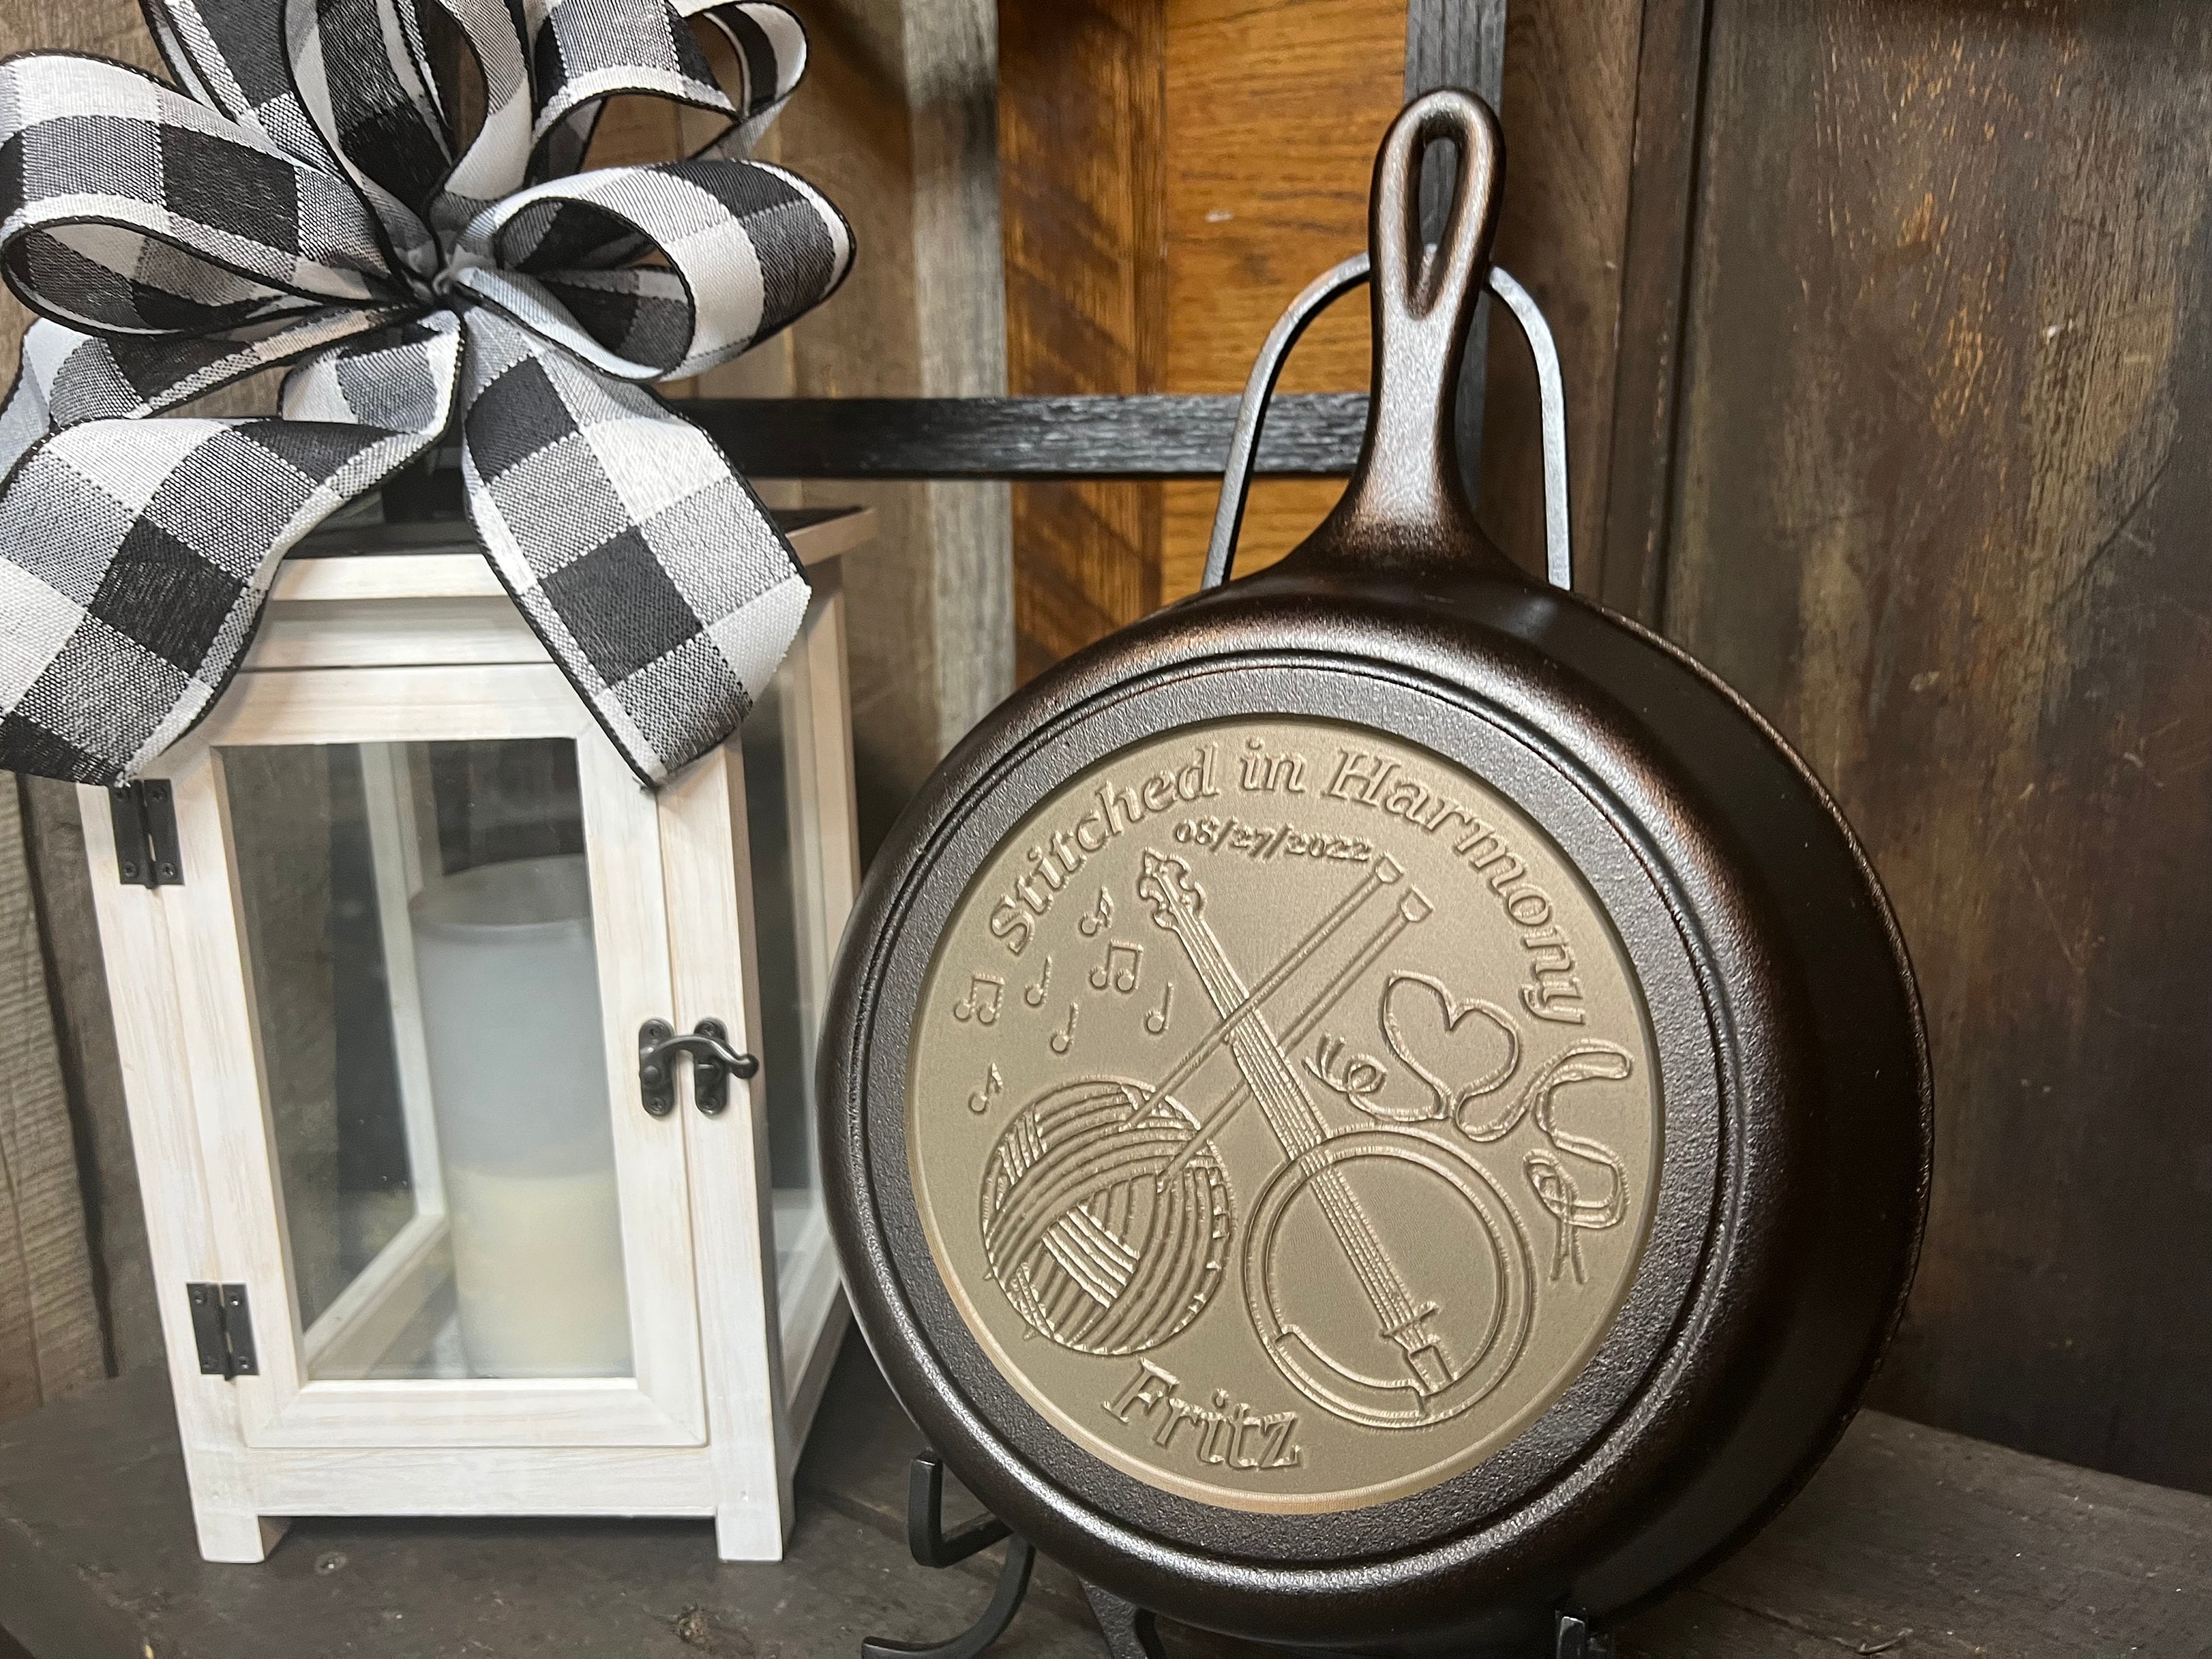 Personalized Home State Cast Iron Pan, Pan